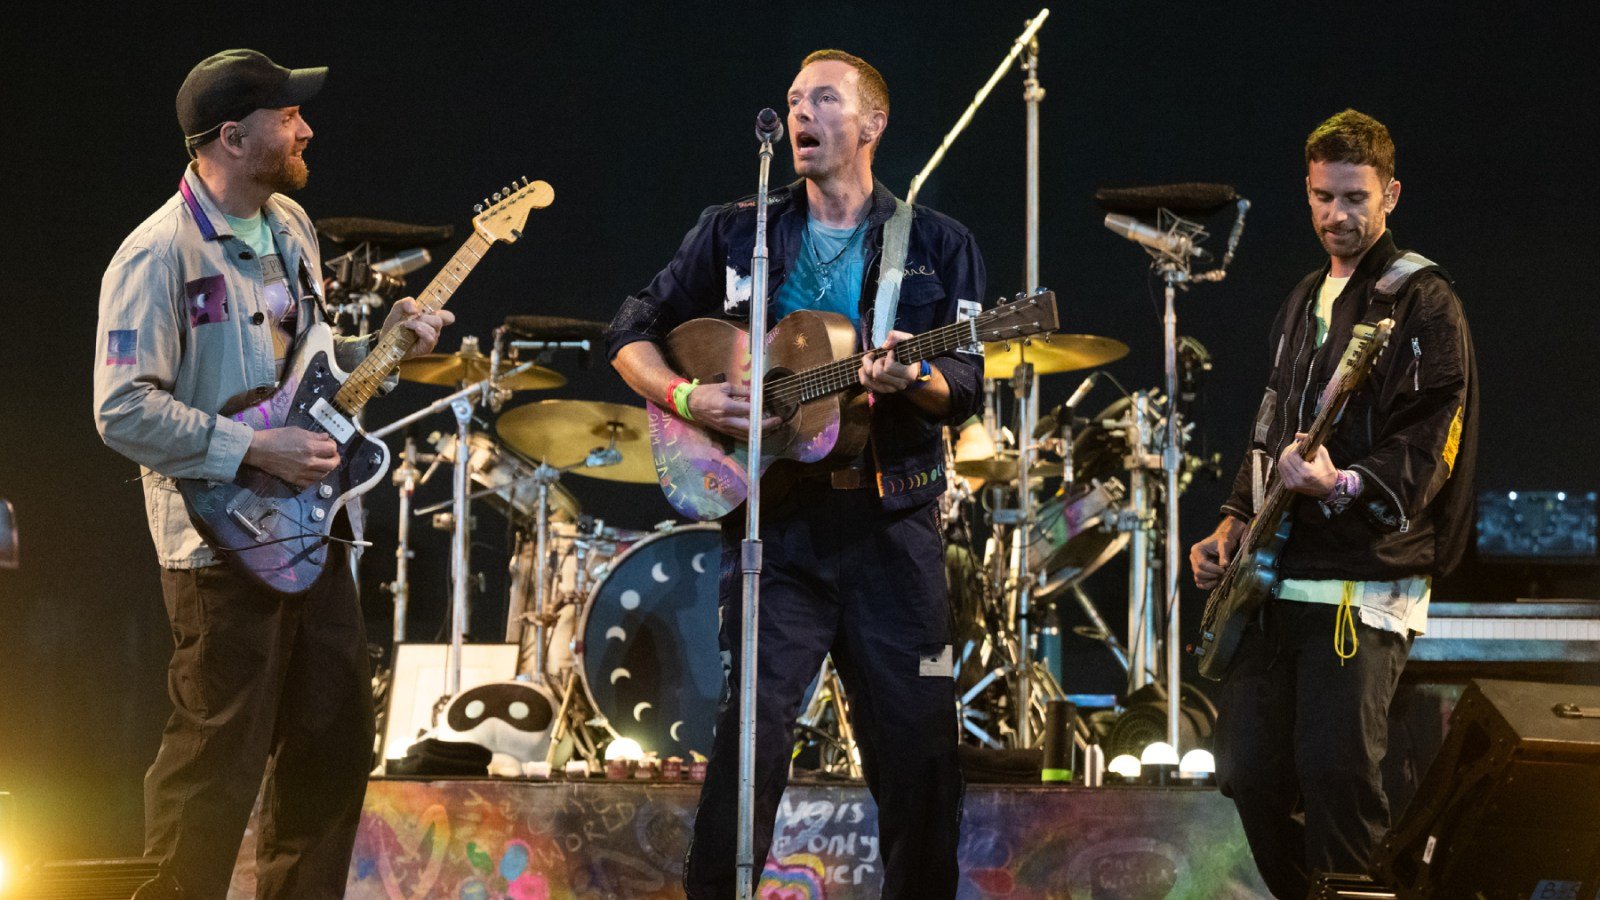 Watch Michael J. Fox Join Coldplay on Guitar at Glastonbury